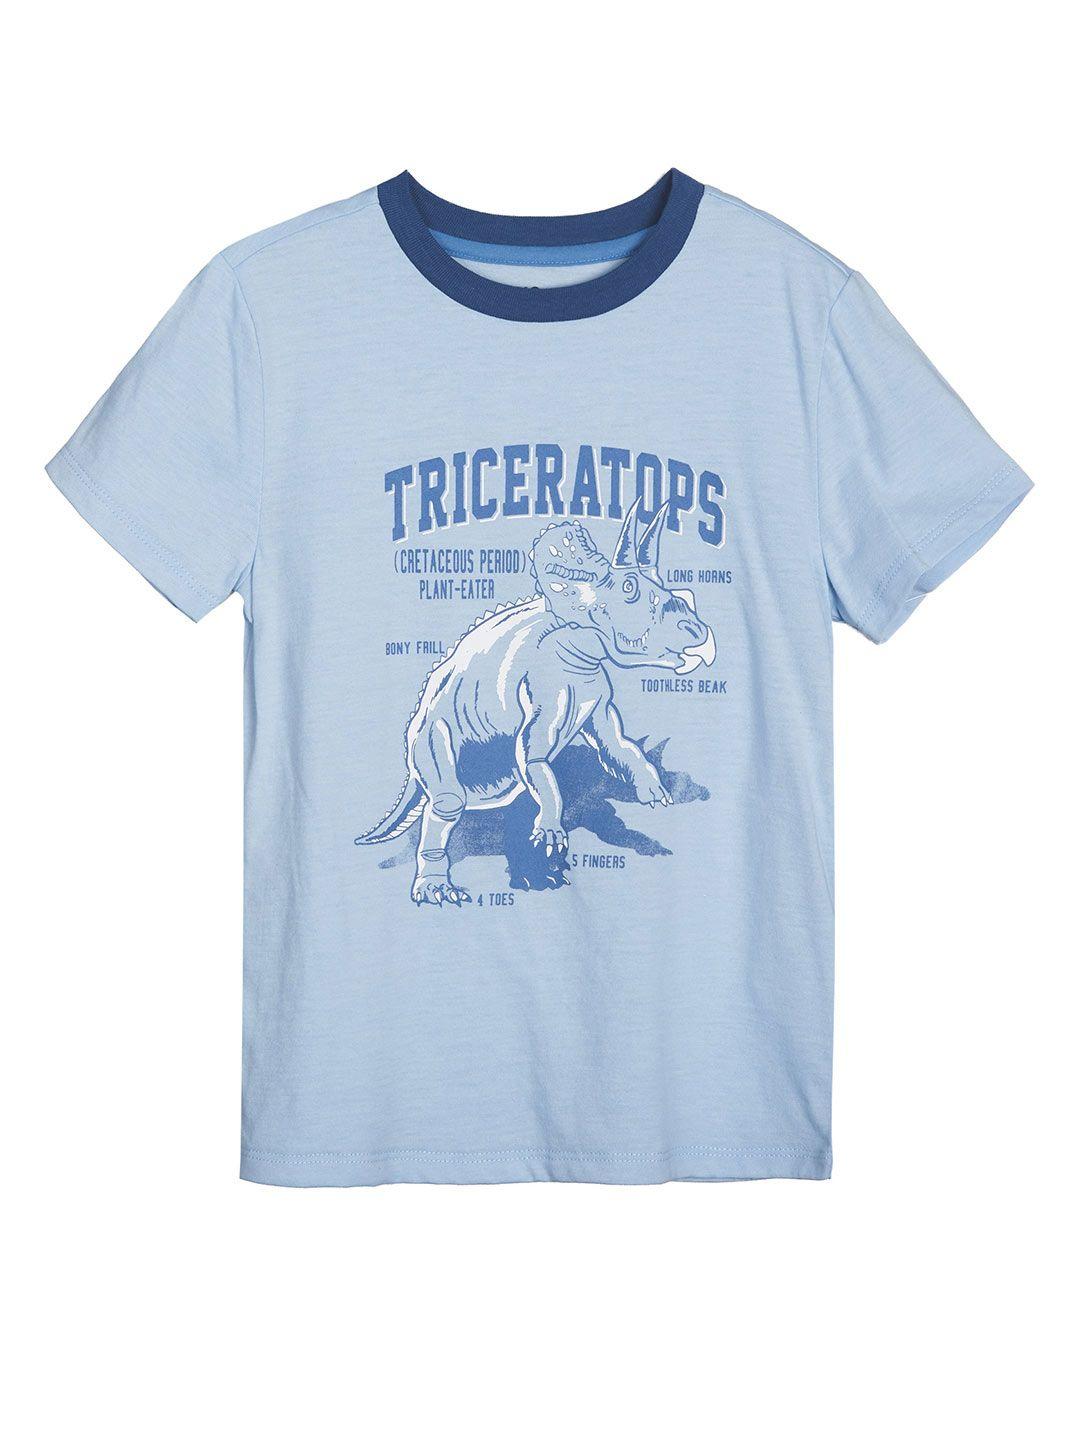 macy's epic threads boys blue & white graphic printed t-shirt